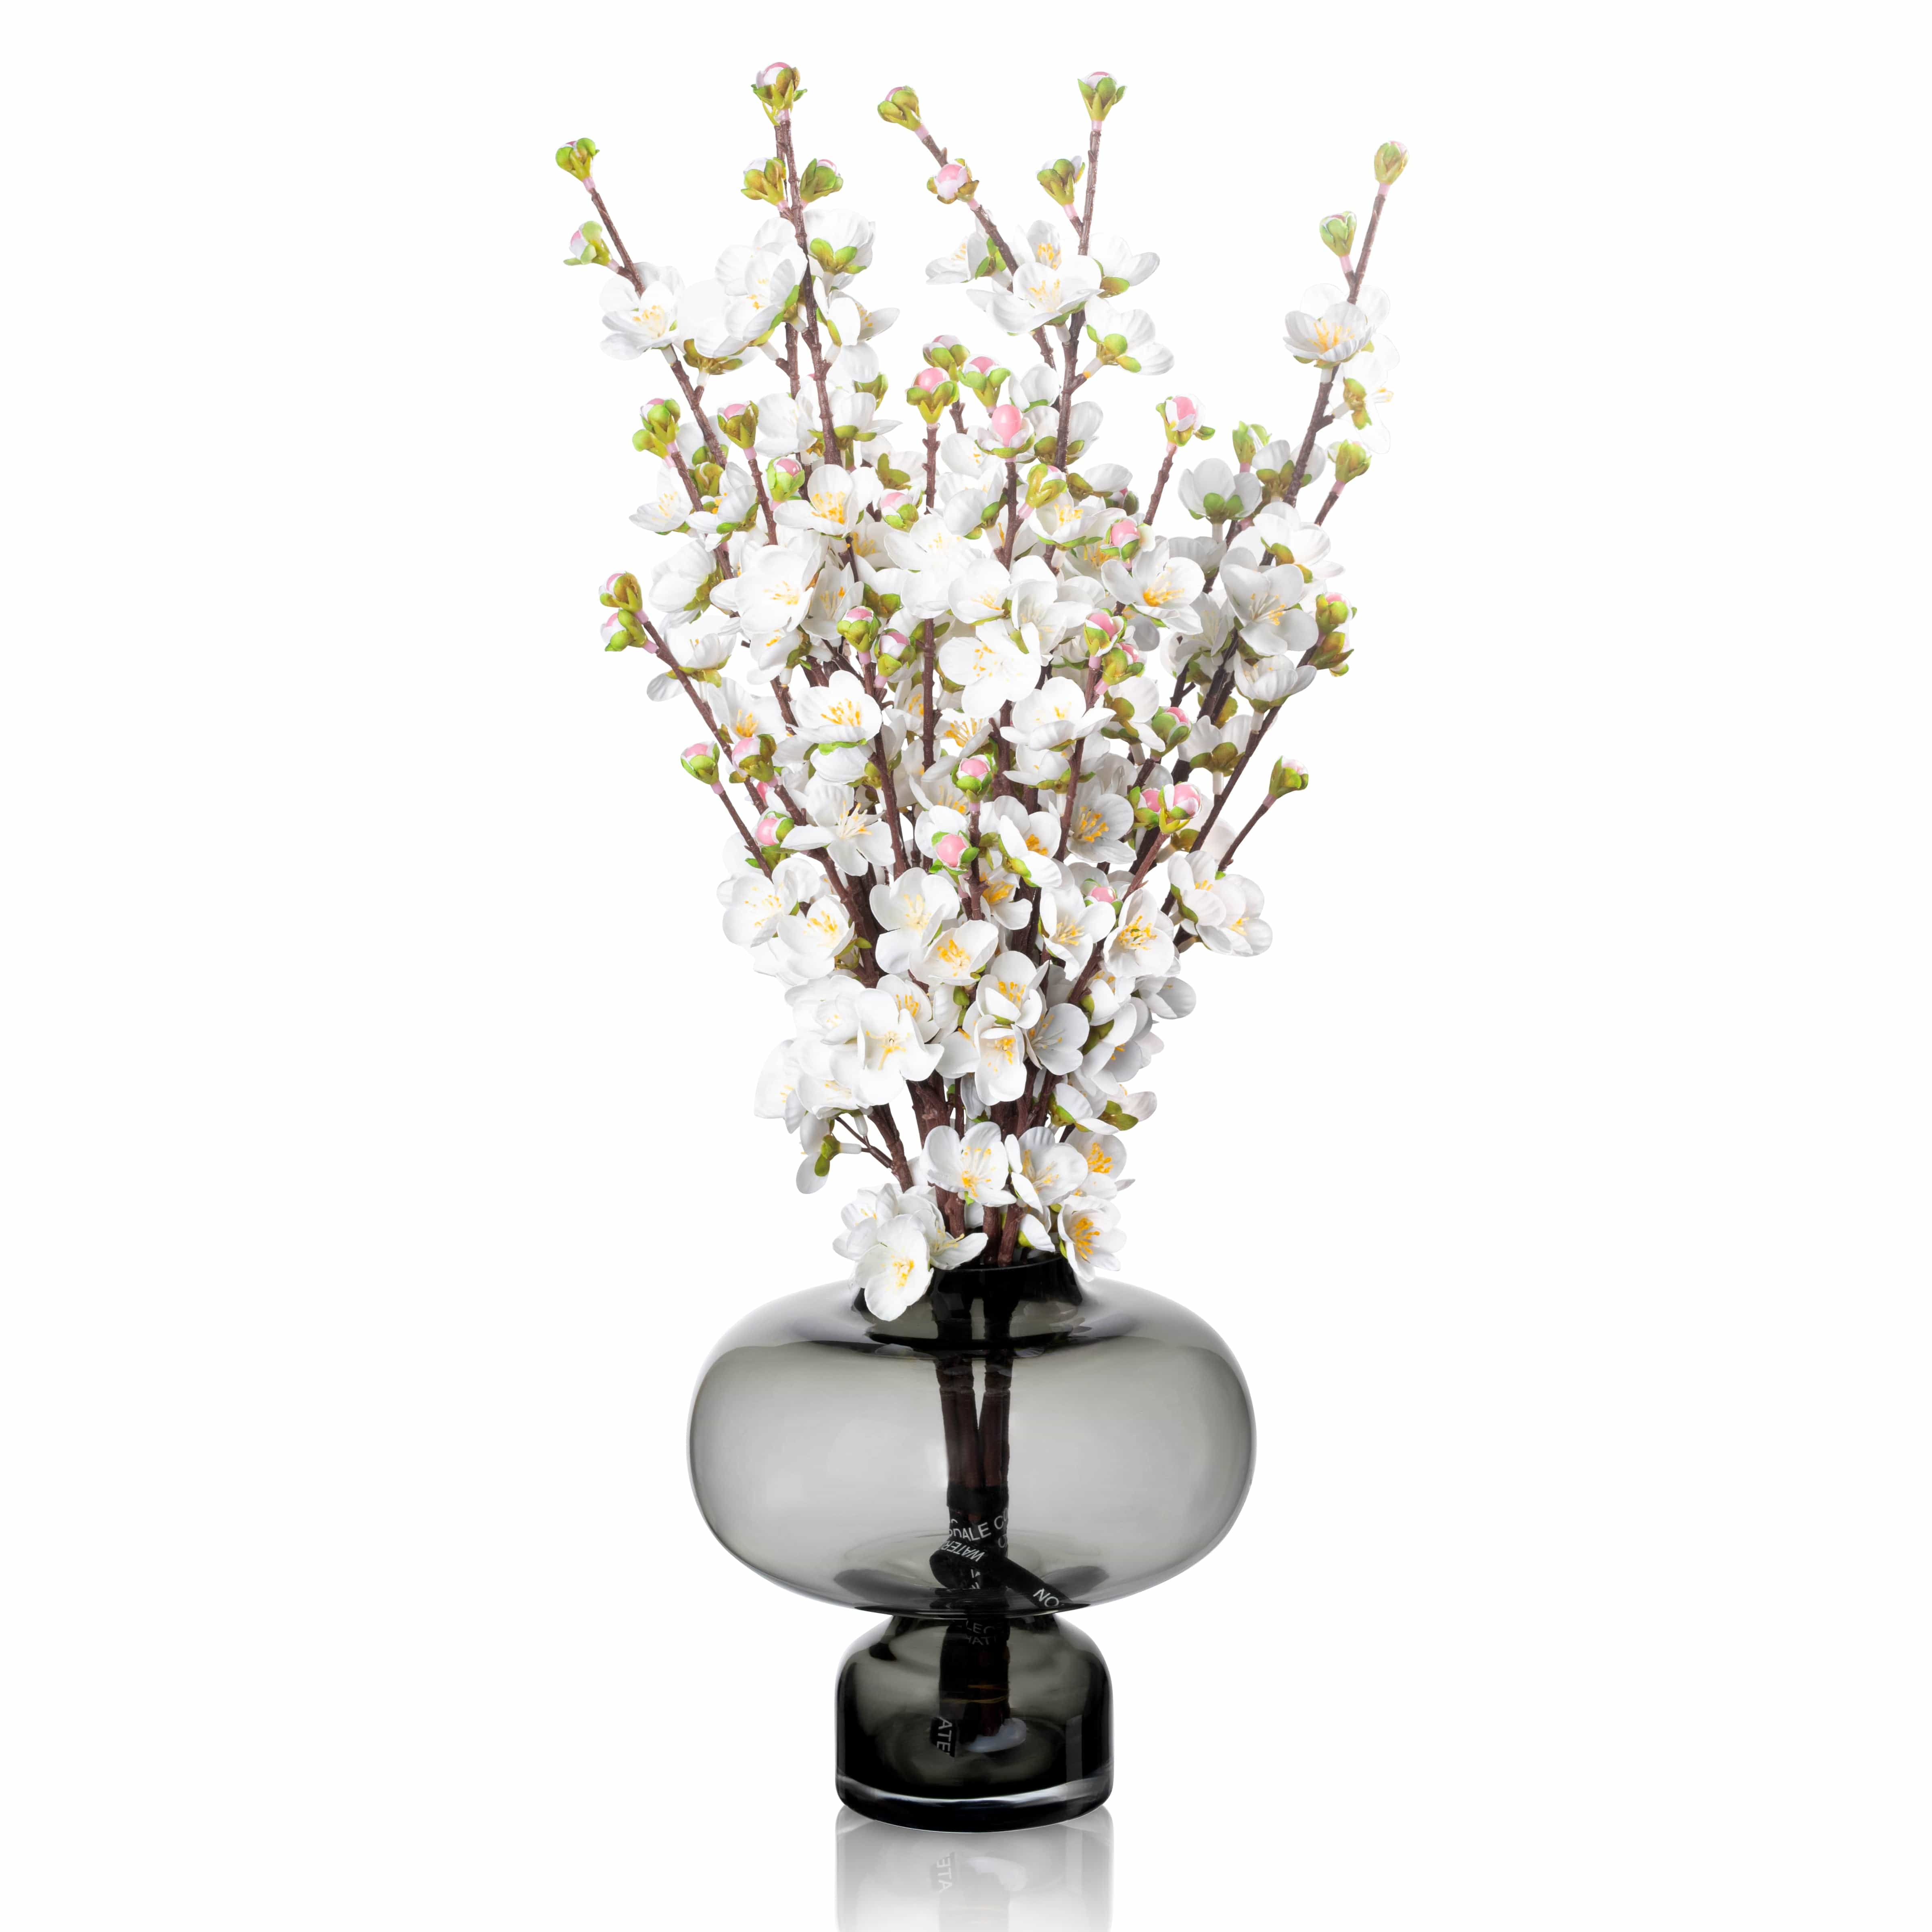 Peach Blossoms Smoke Arrangement - Waterdale Collection